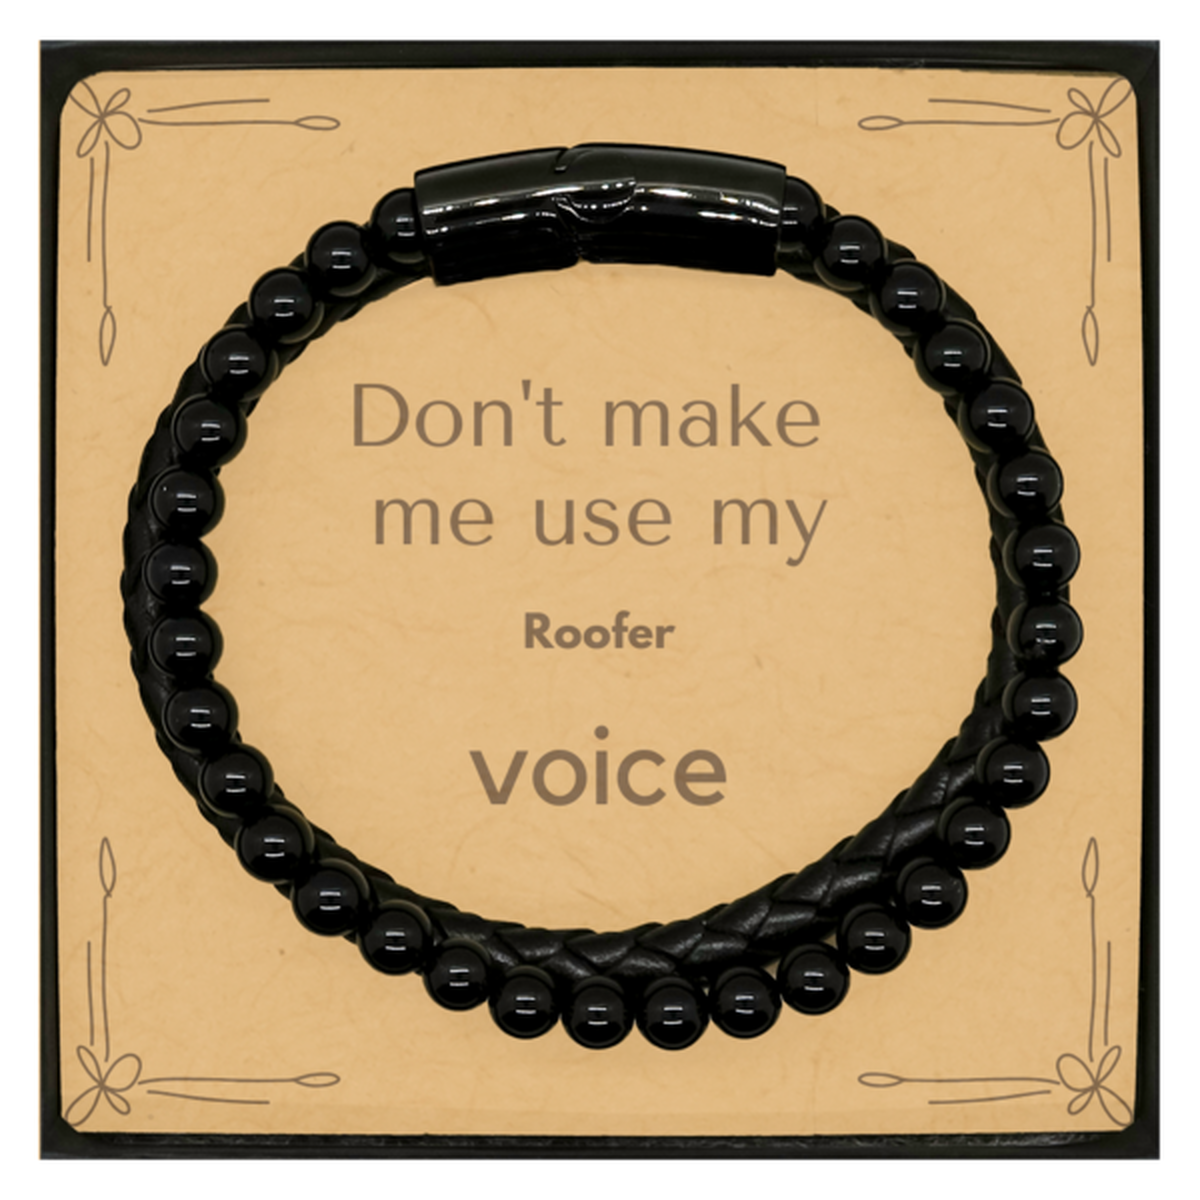 Don't make me use my Roofer voice, Sarcasm Roofer Card Gifts, Christmas Roofer Stone Leather Bracelets Birthday Unique Gifts For Roofer Coworkers, Men, Women, Colleague, Friends